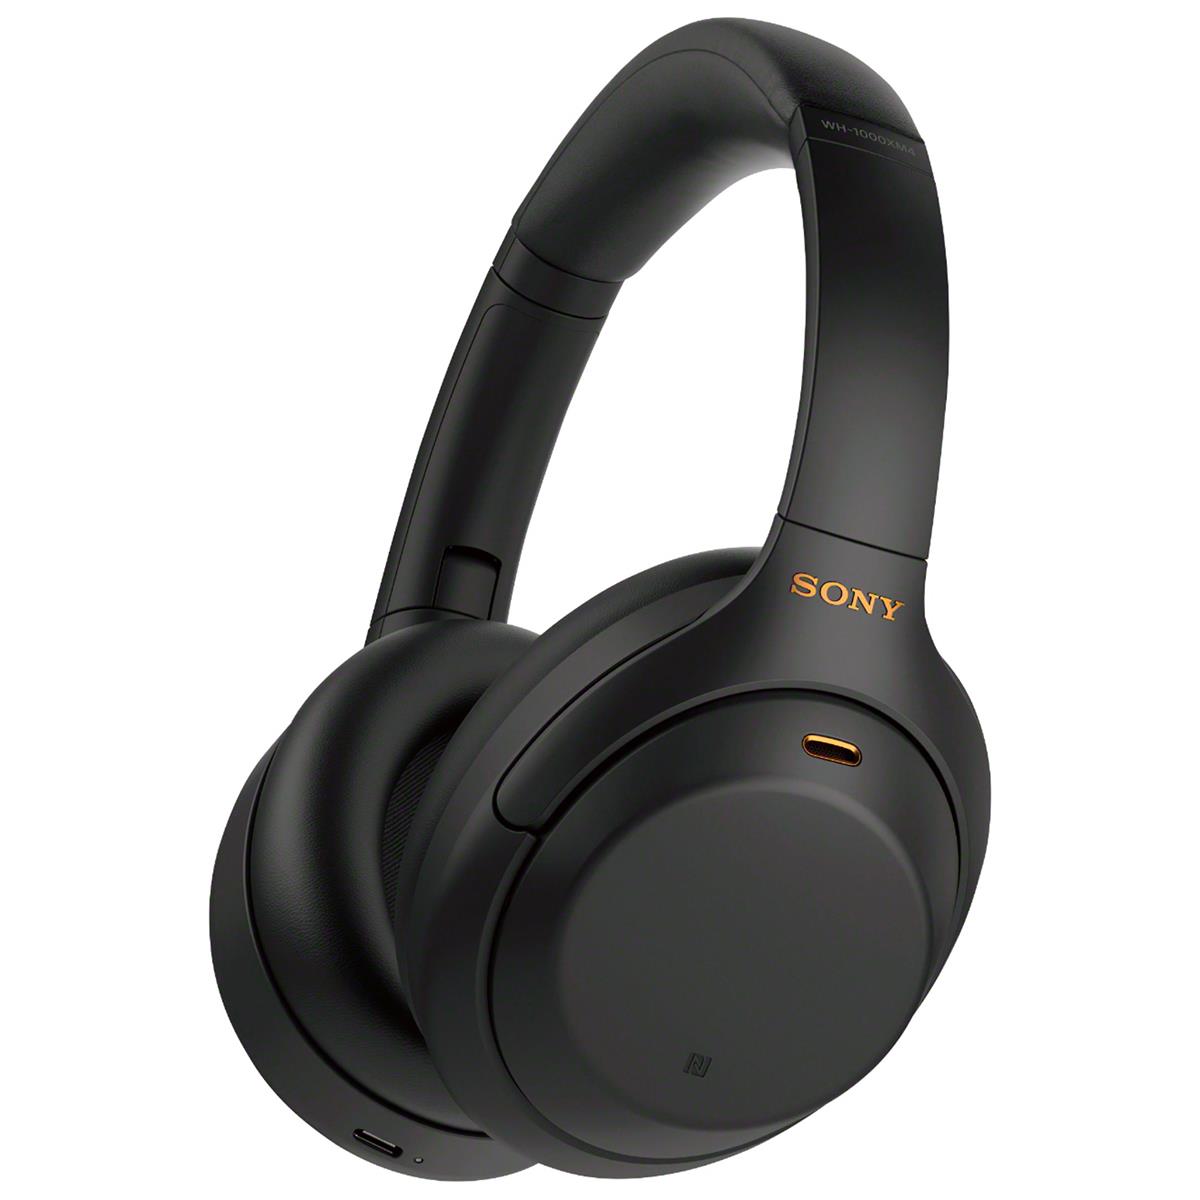 Sony WH-1000XM4 - prices in stores USA. Buy Sony WH-1000XM4 : Washington,  New York, Las Vegas, San Francisco, Los Angeles, Chicago